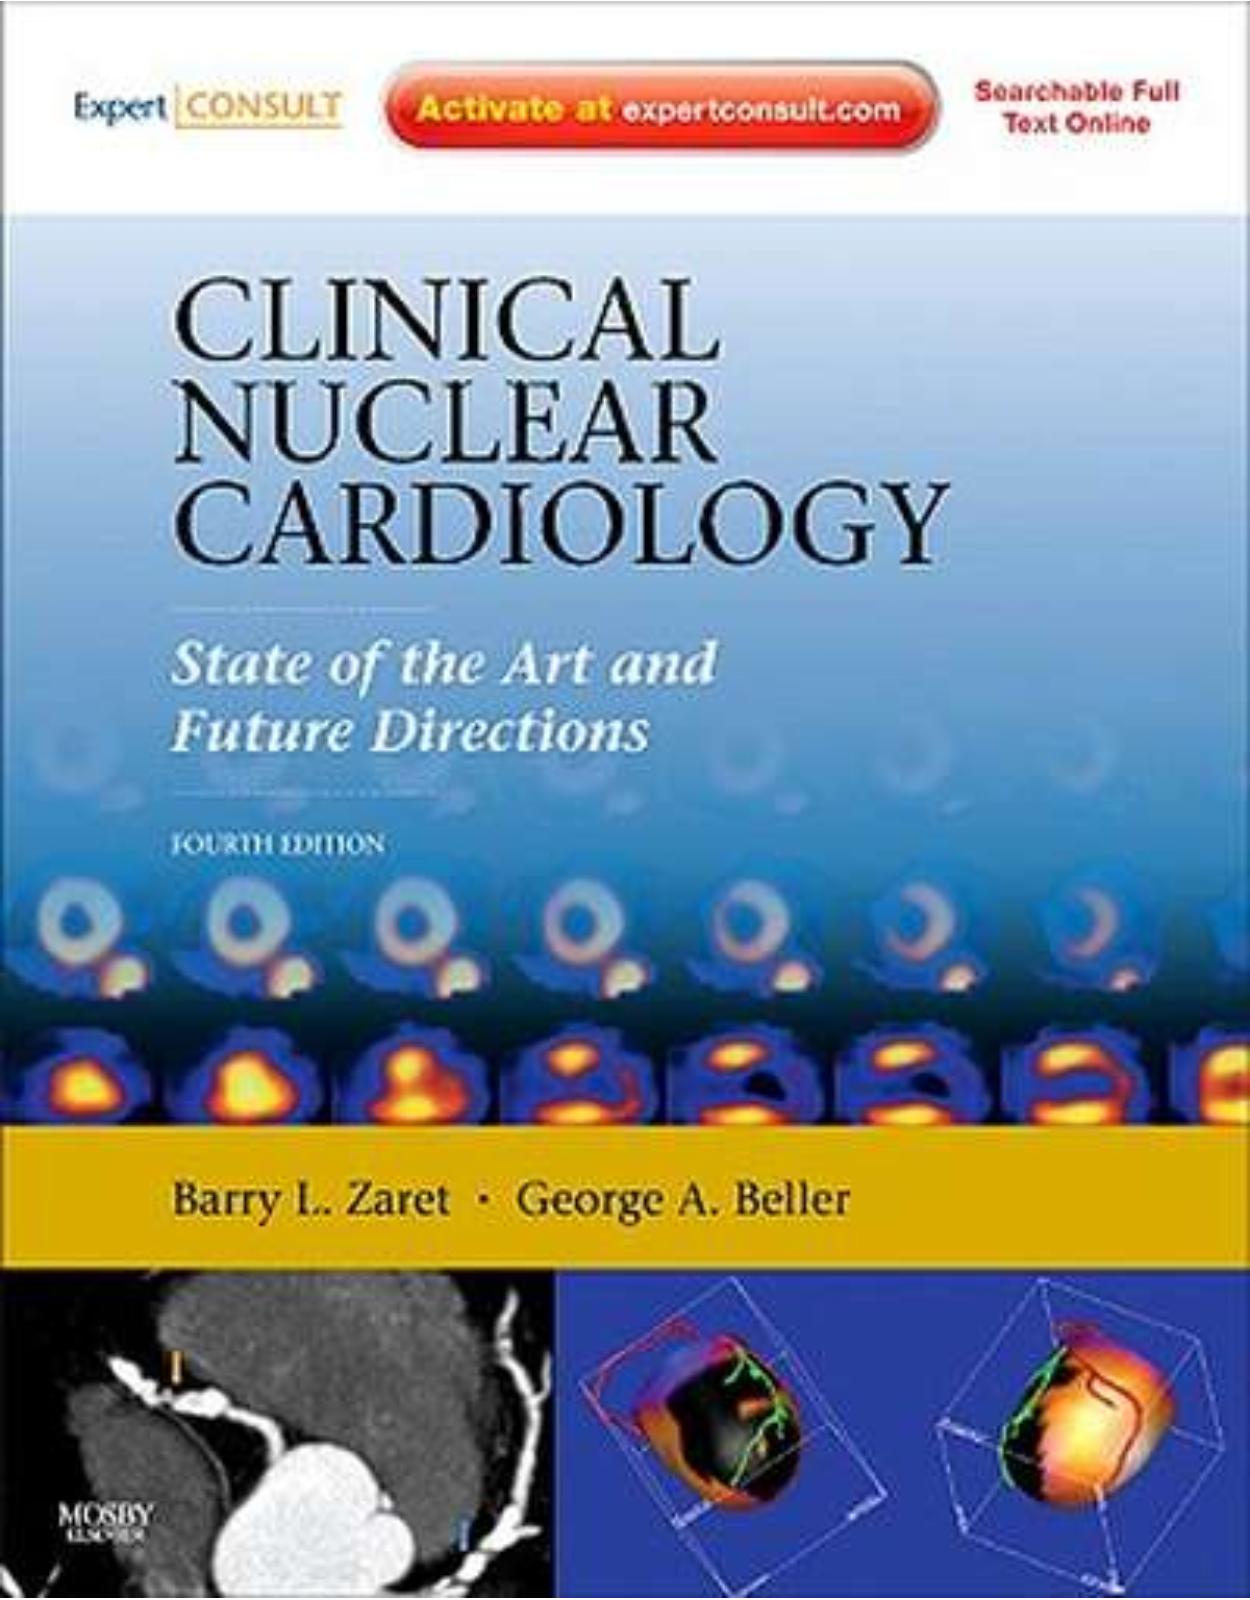 Clinical Nuclear Cardiology: State of the Art and Future Directions: Expert Consult: Online and Print 4th Revised edition, Expert Consult: Online and Print